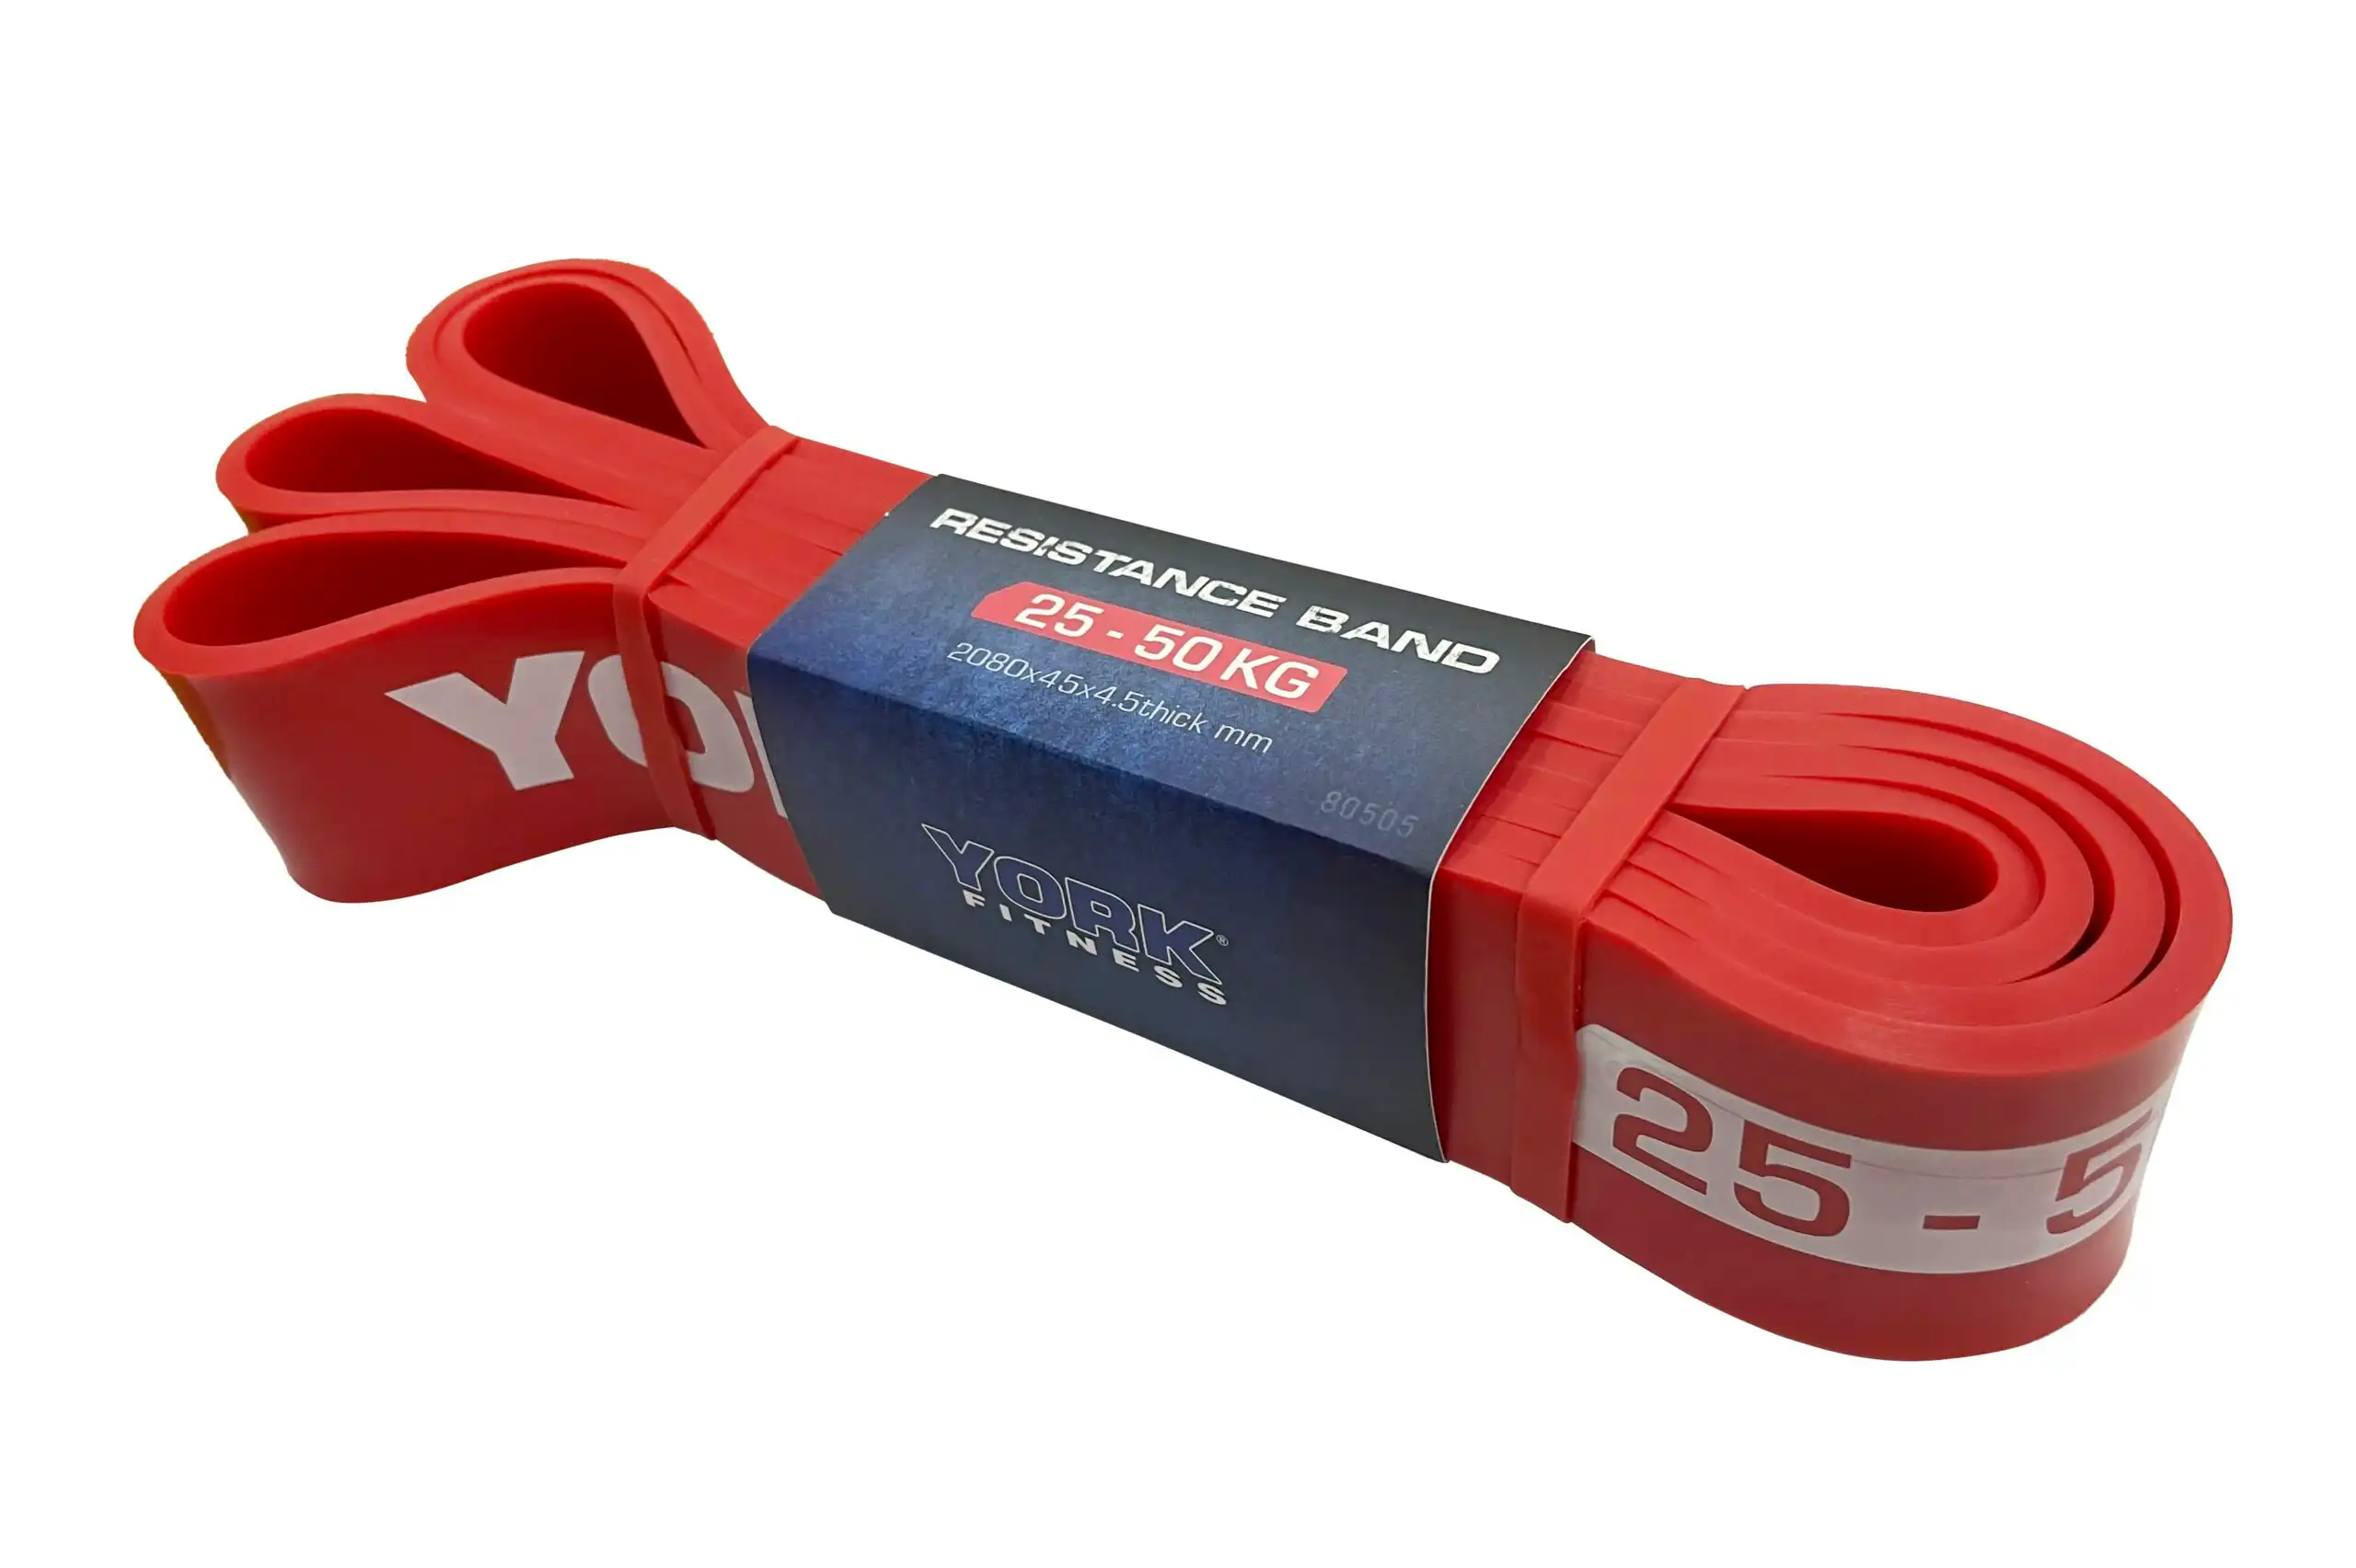 York Resistance Band 25-50kgs / 45mm x 2080 x 4.5mm (Red)